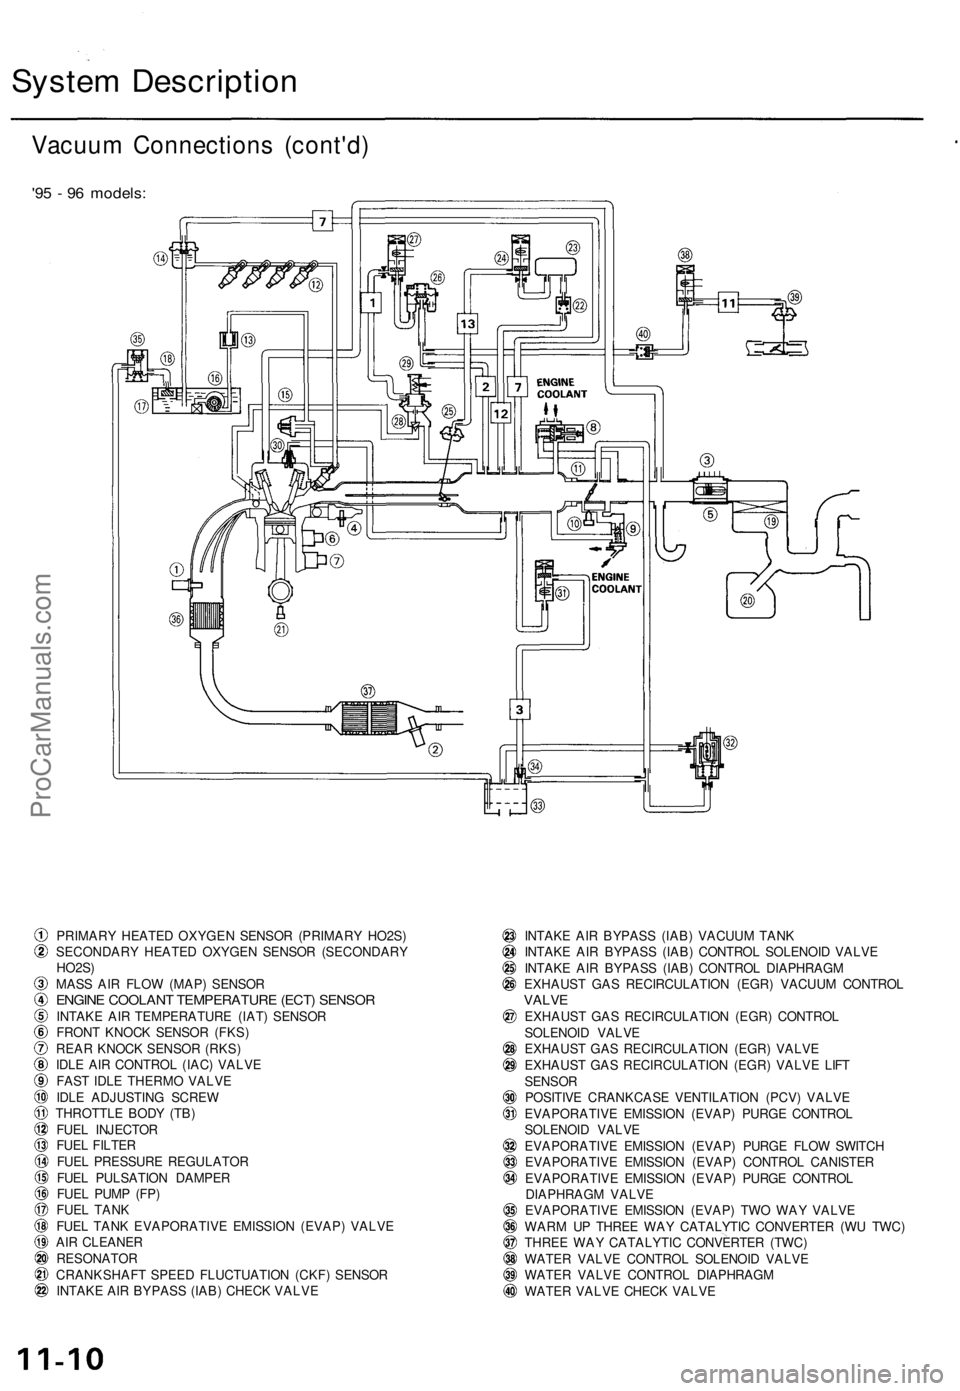 ACURA TL 1995  Service Repair Manual 
System Description

Vacuum Connections (cont'd)

'95 - 96 models:

PRIMARY HEATED OXYGEN SENSOR (PRIMARY HO2S)

SECONDARY HEATED OXYGEN SENSOR (SECONDARY

HO2S)

MASS AIR FLOW (MAP) SENSOR

E